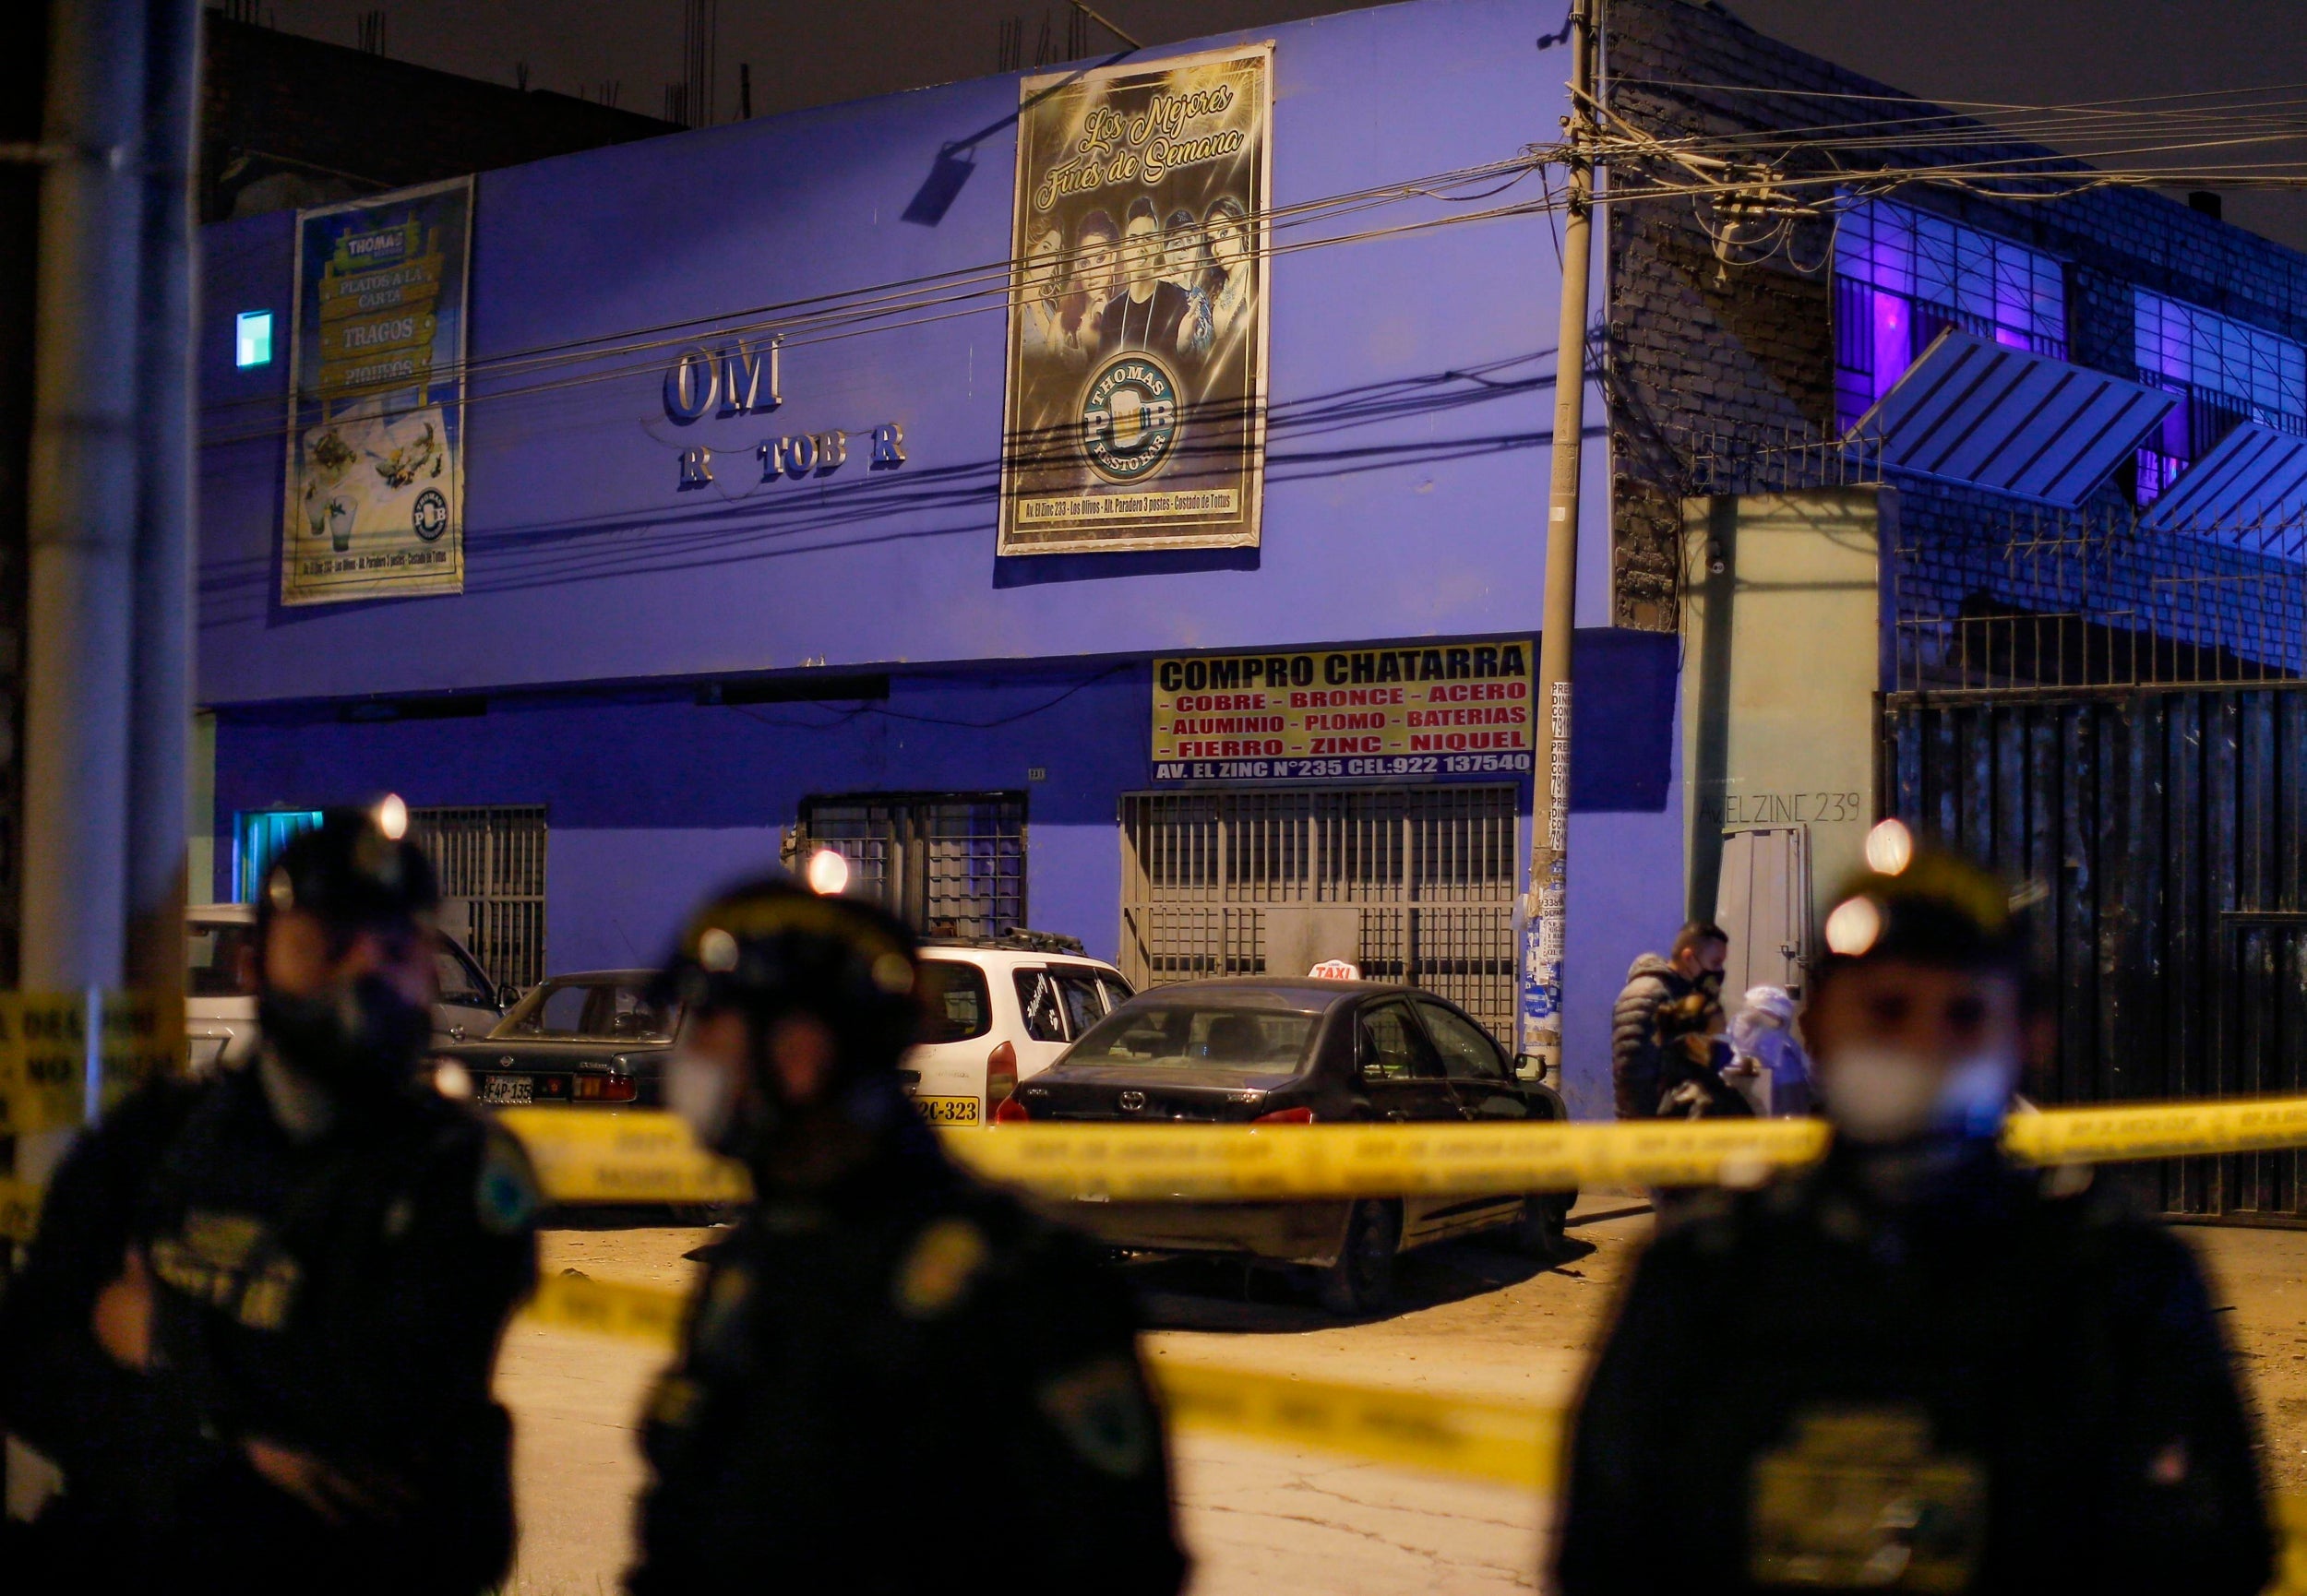 Police officers stand guard outside the nightclub in Lima after the raid